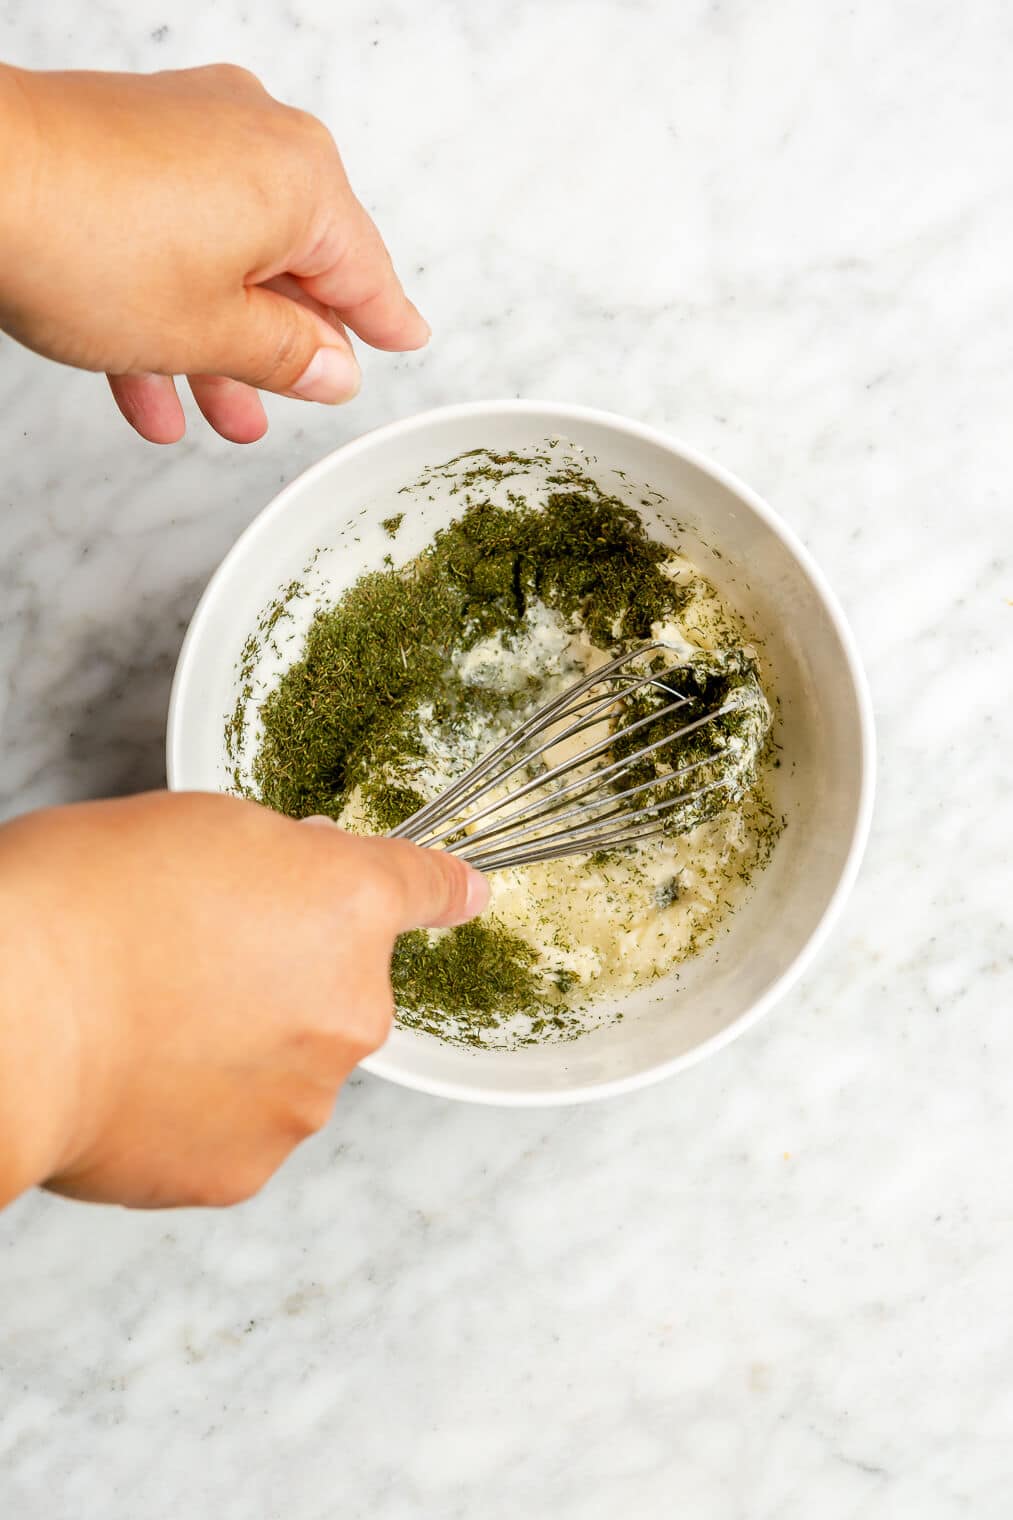 Hand whisking together mayonnaise, lemon juice, and dill in a small white bowl on a grey and white marble surface.